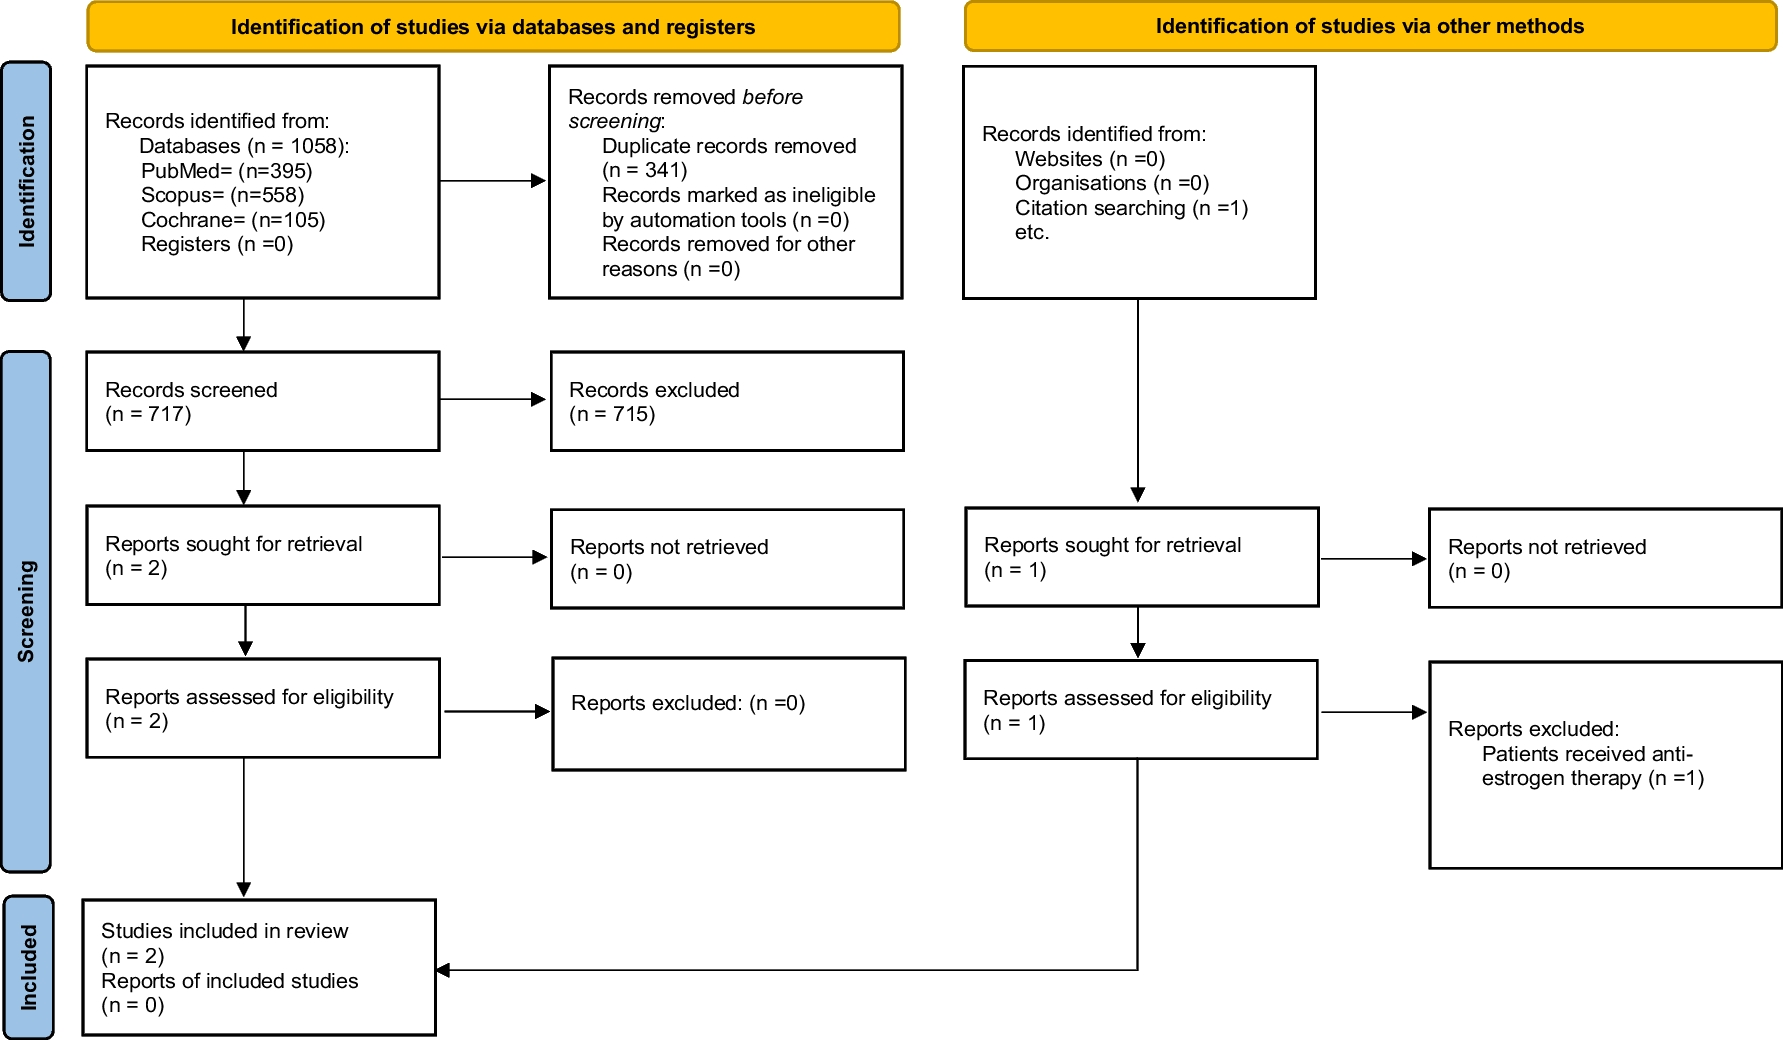 Antiosteoporosis therapy after discontinuation of menopausal hormone therapy: a systematic review